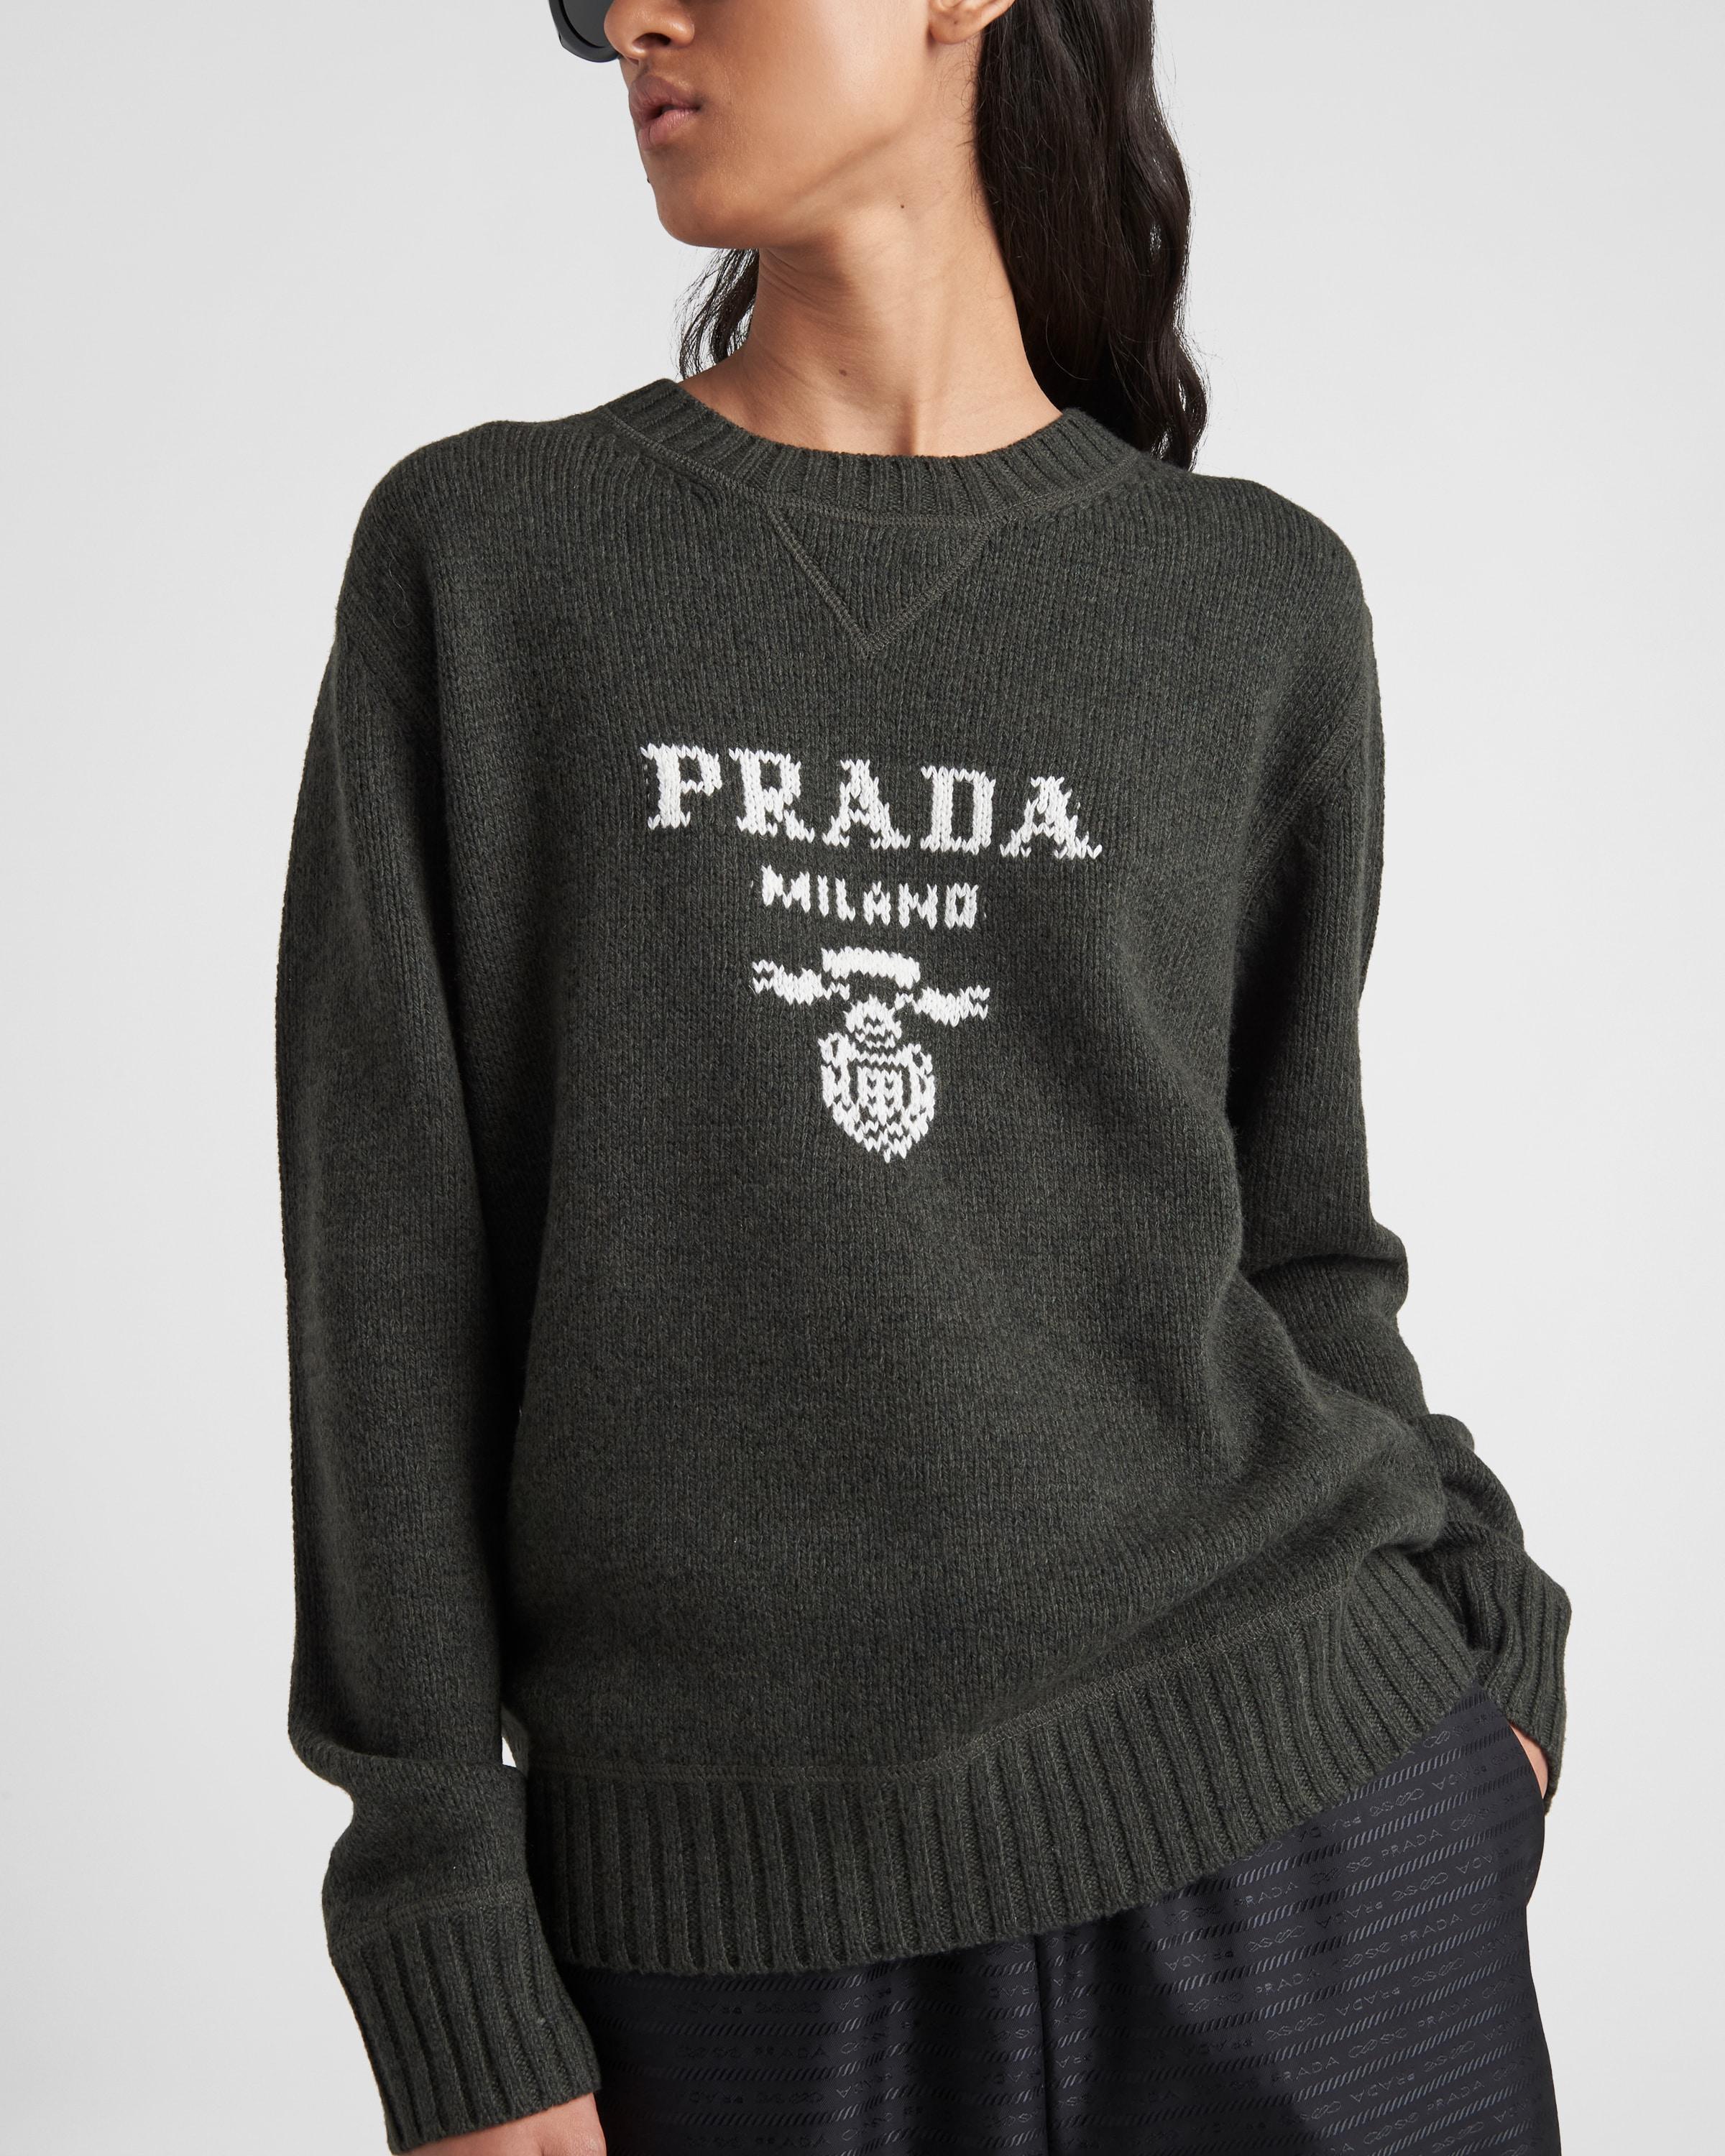 Prada Cashmere And Wool Logo Crew-neck Sweater in Green | Lyst